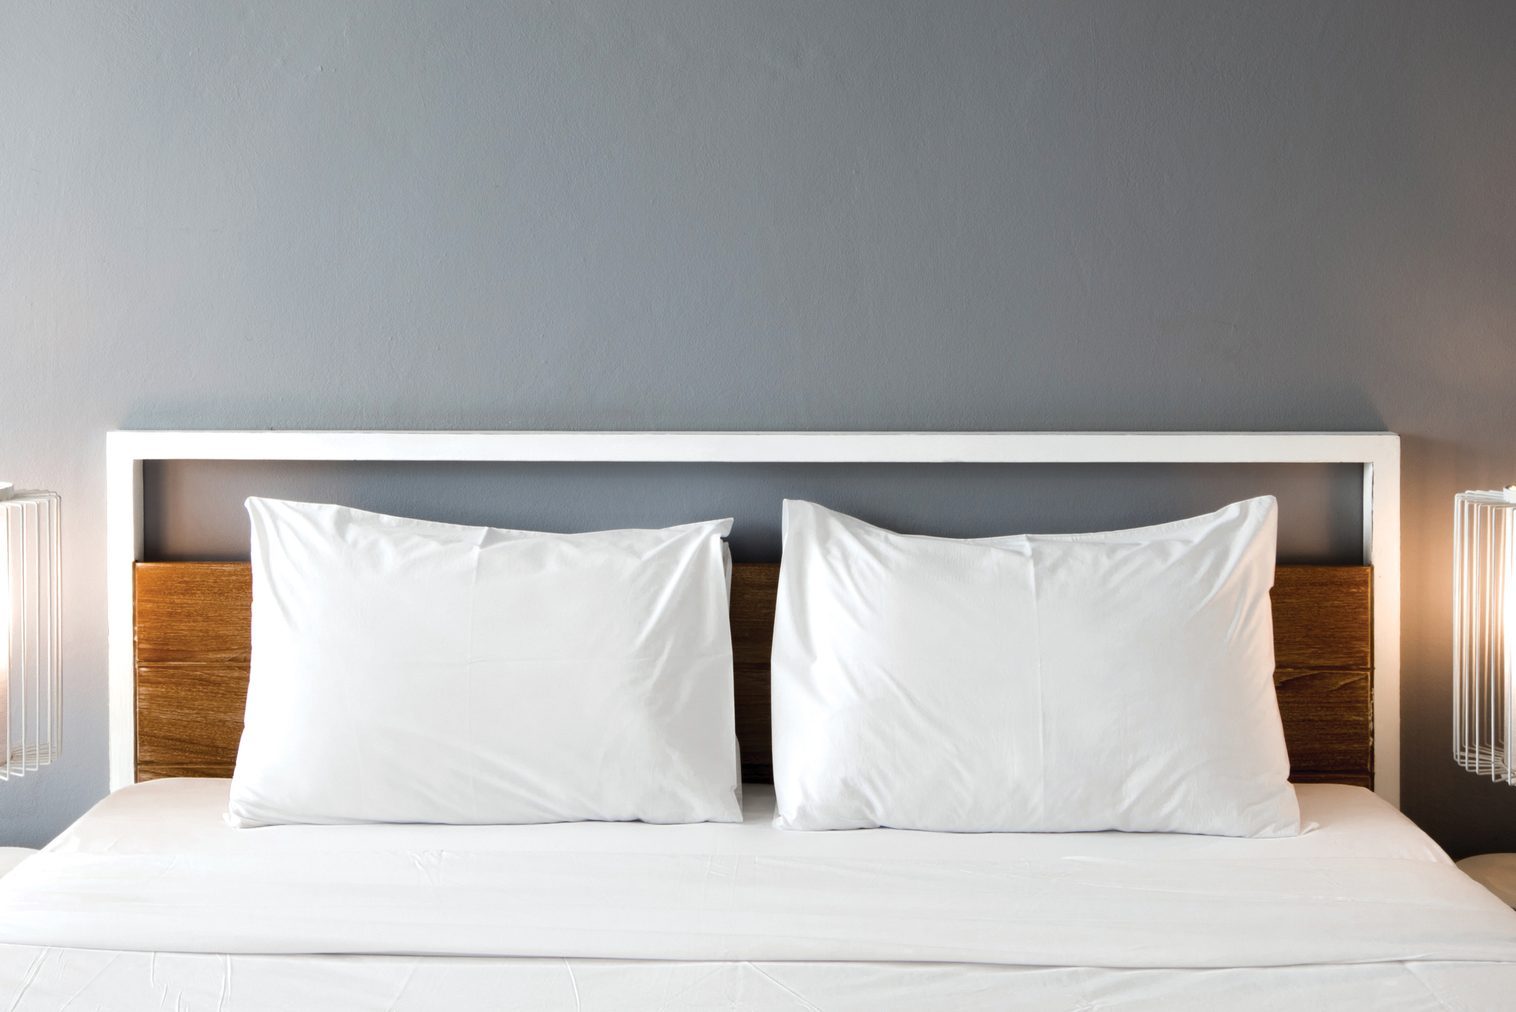 What Should You Do With Your Bed's Throw Pillows When You Sleep?